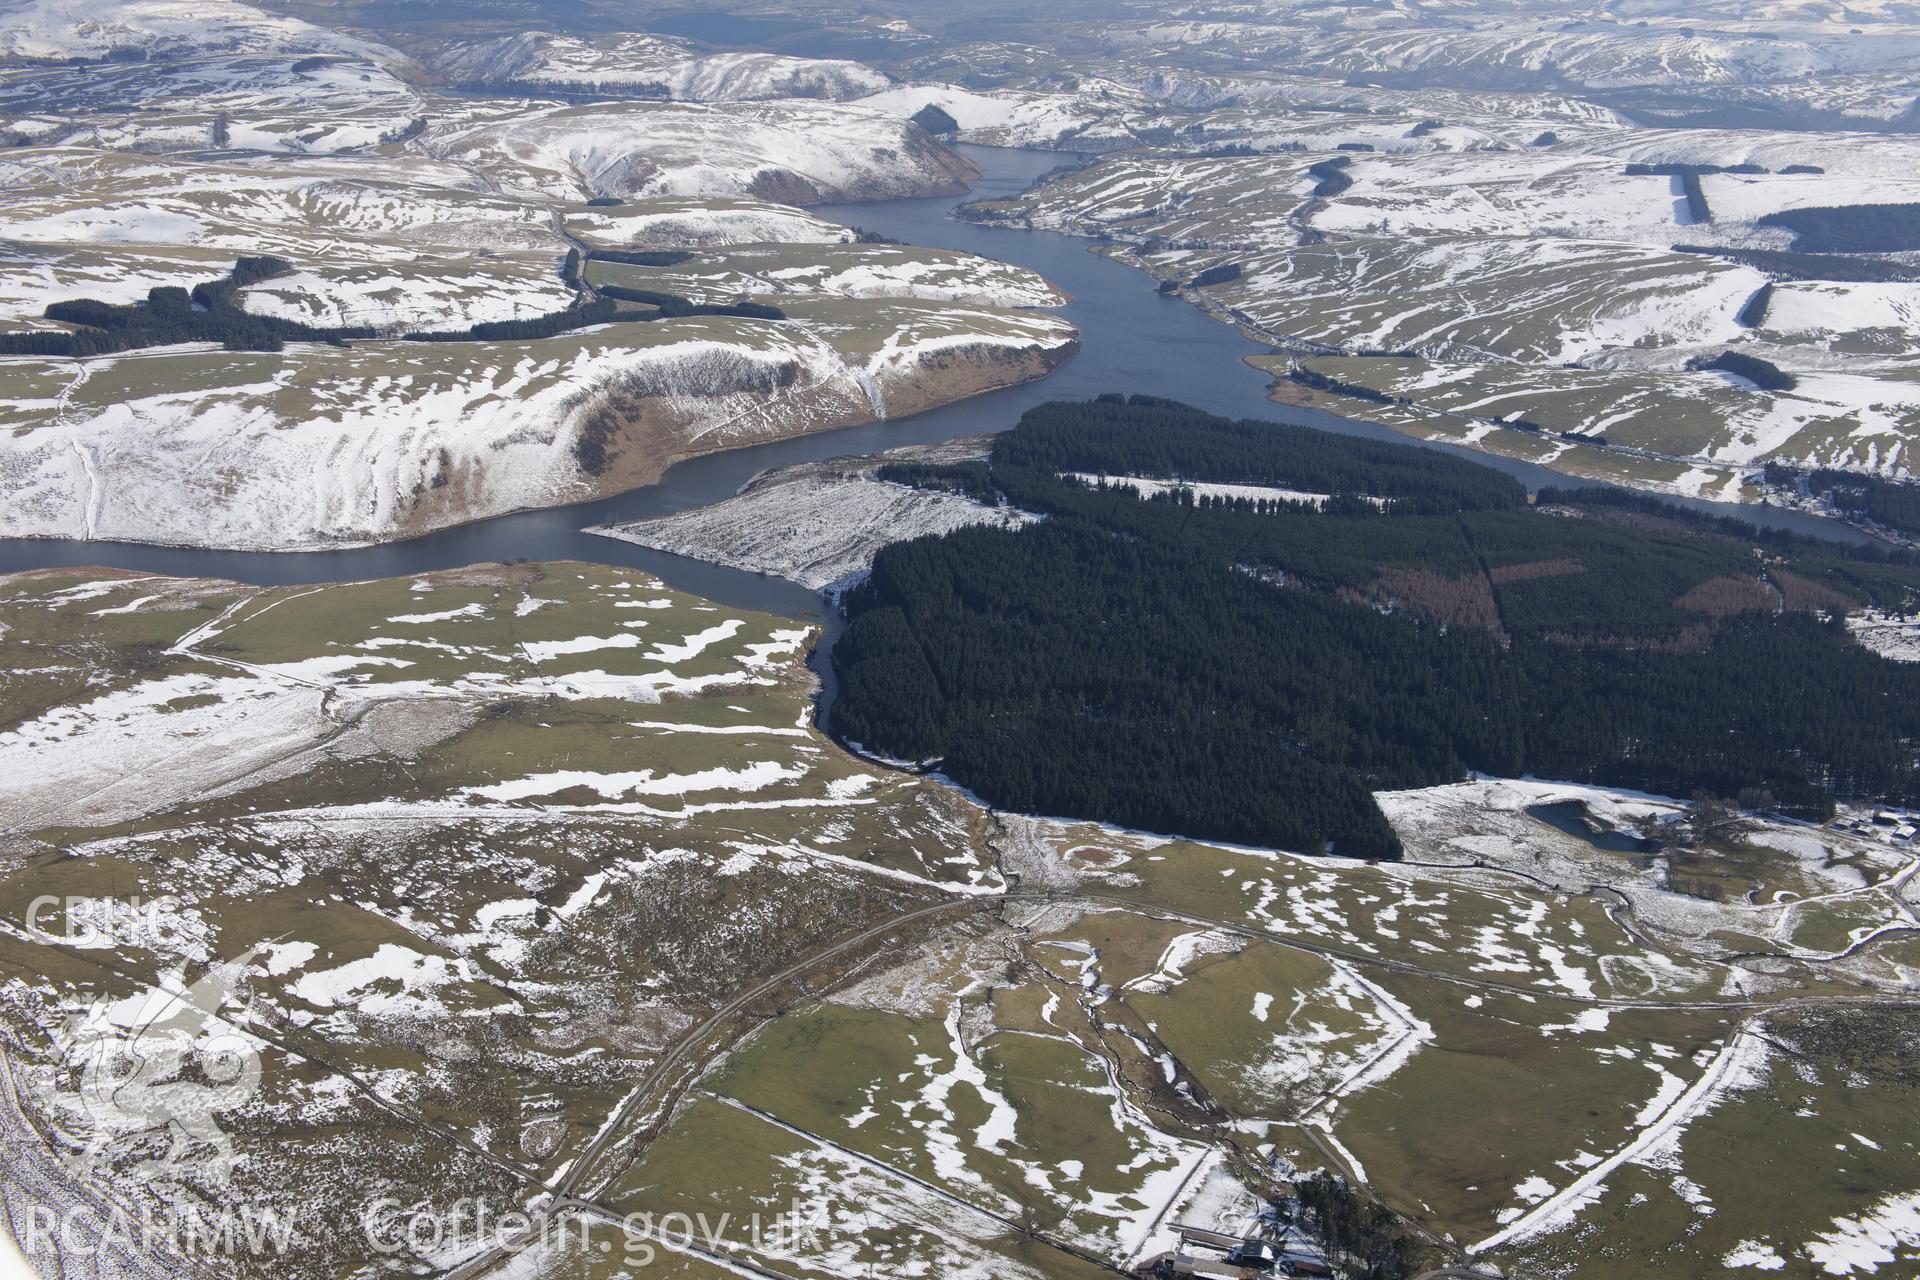 Llyn Clywedog reservoir, Llanidloes. Oblique aerial photograph taken during the Royal Commission's programme of archaeological aerial reconnaissance by Toby Driver on 2nd April 2013.